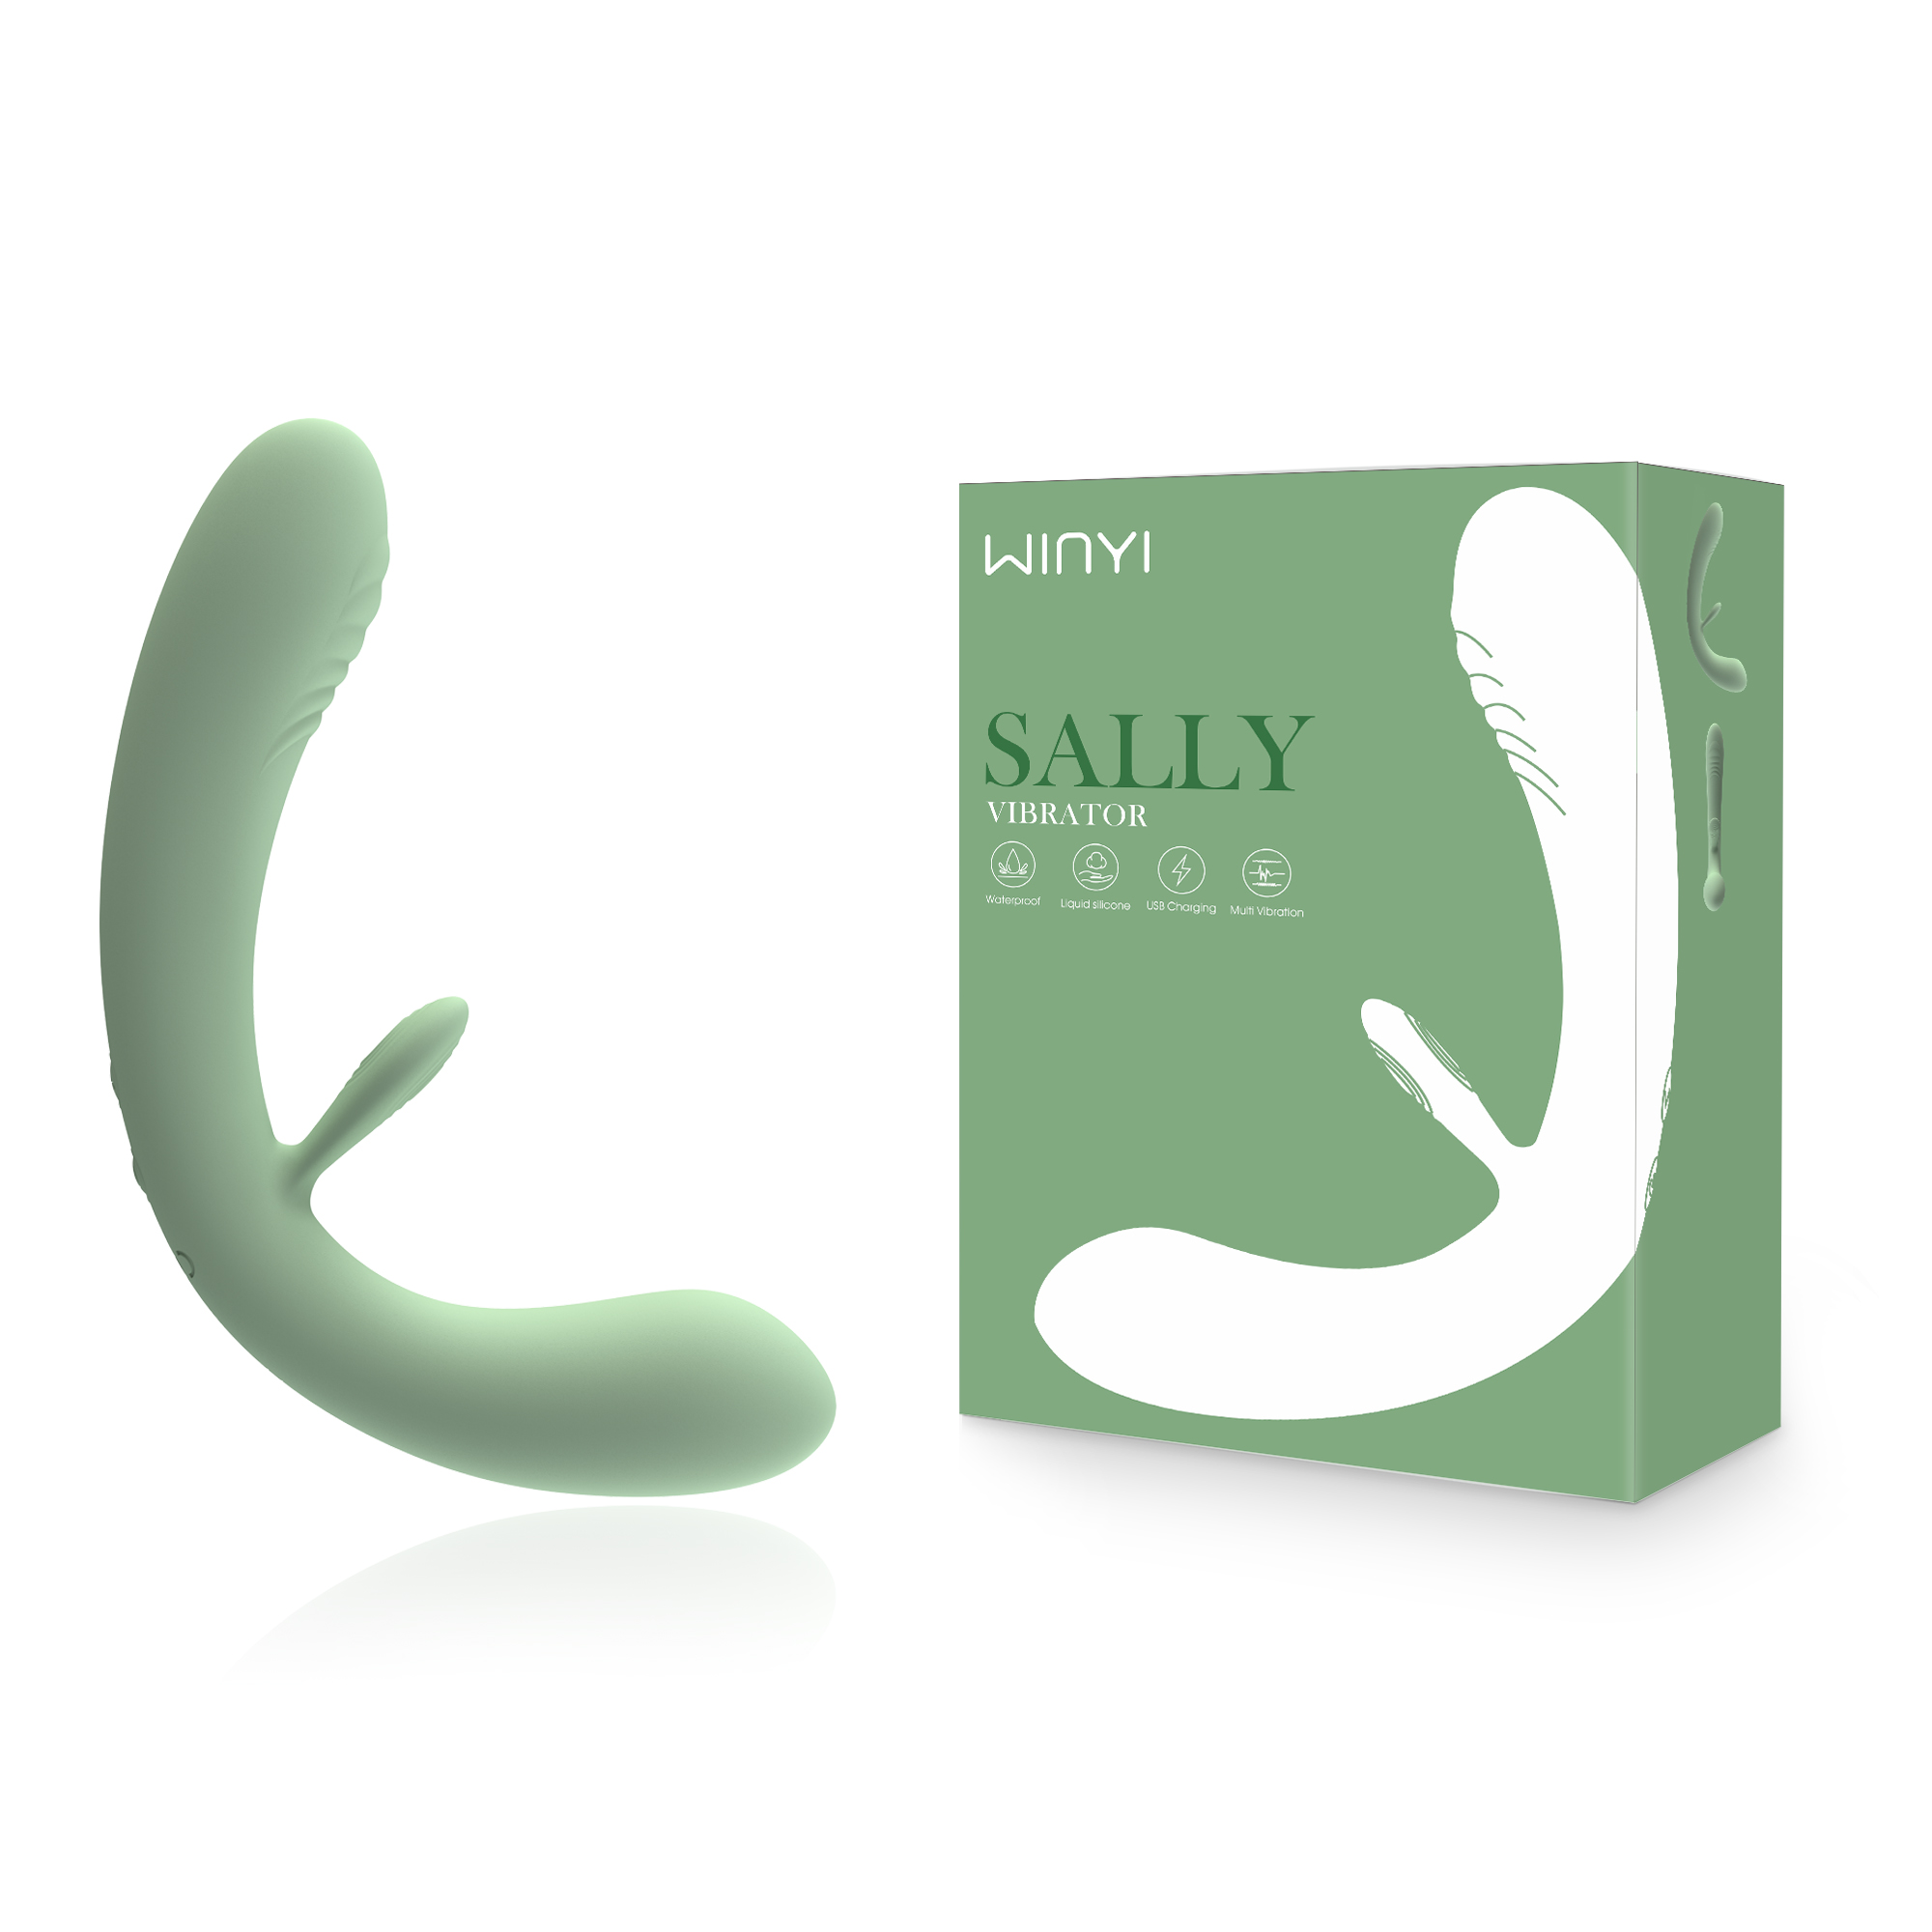 WY0622-sex toy packaging-WINYI-sex toy distributor-szwinyi.com-2023 New Sex Toy-strapless strap on dildo